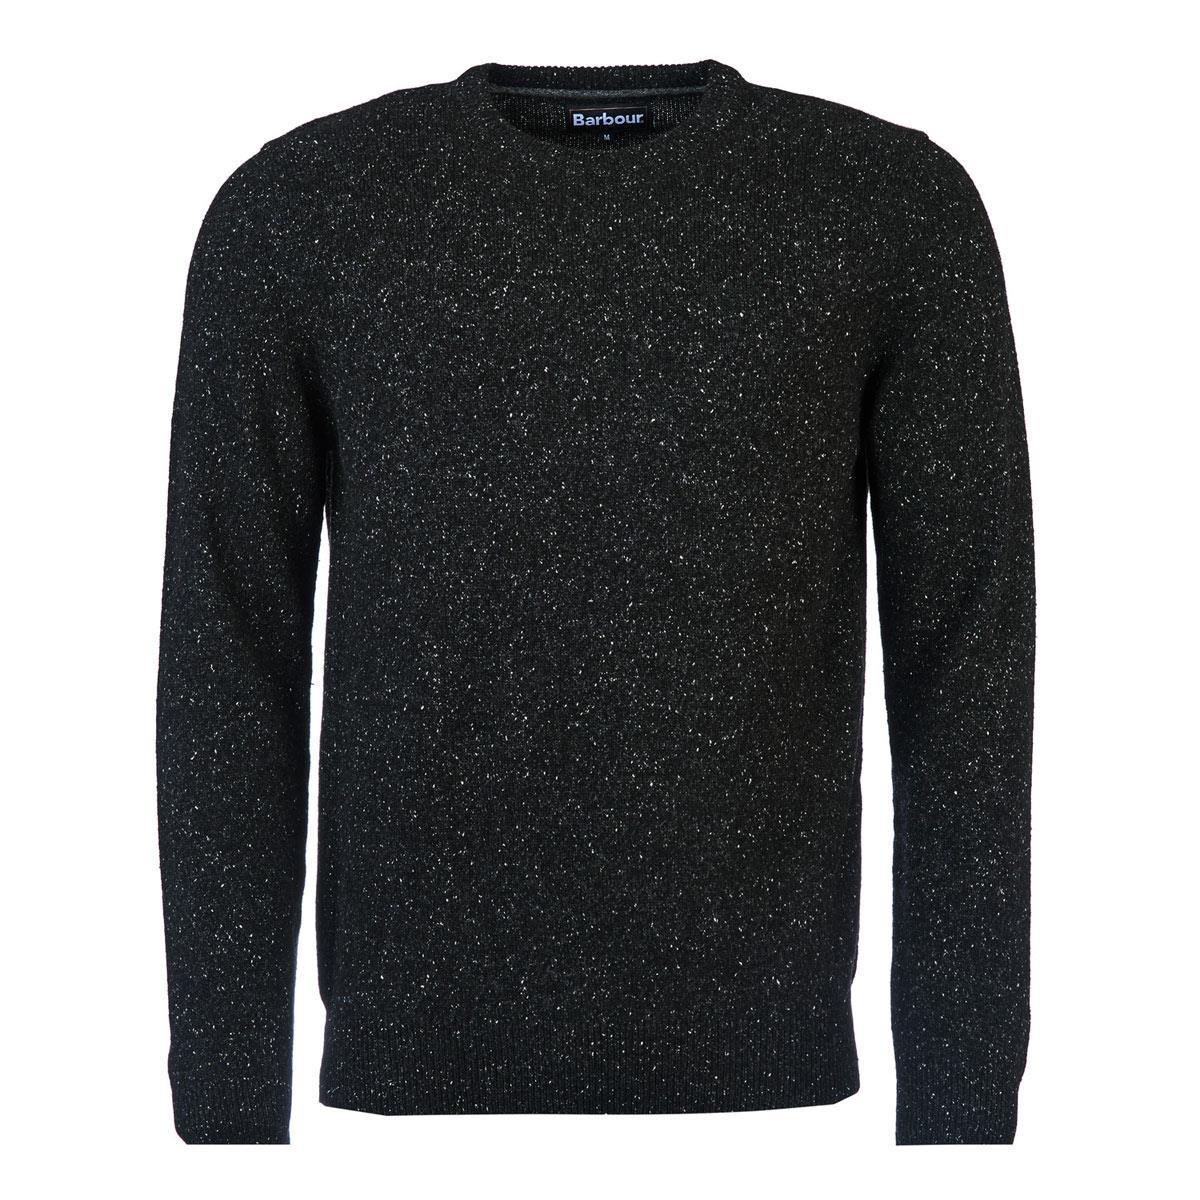 What colors & sizes does the Barbour Tisbury Crew Neck Sweater come in?